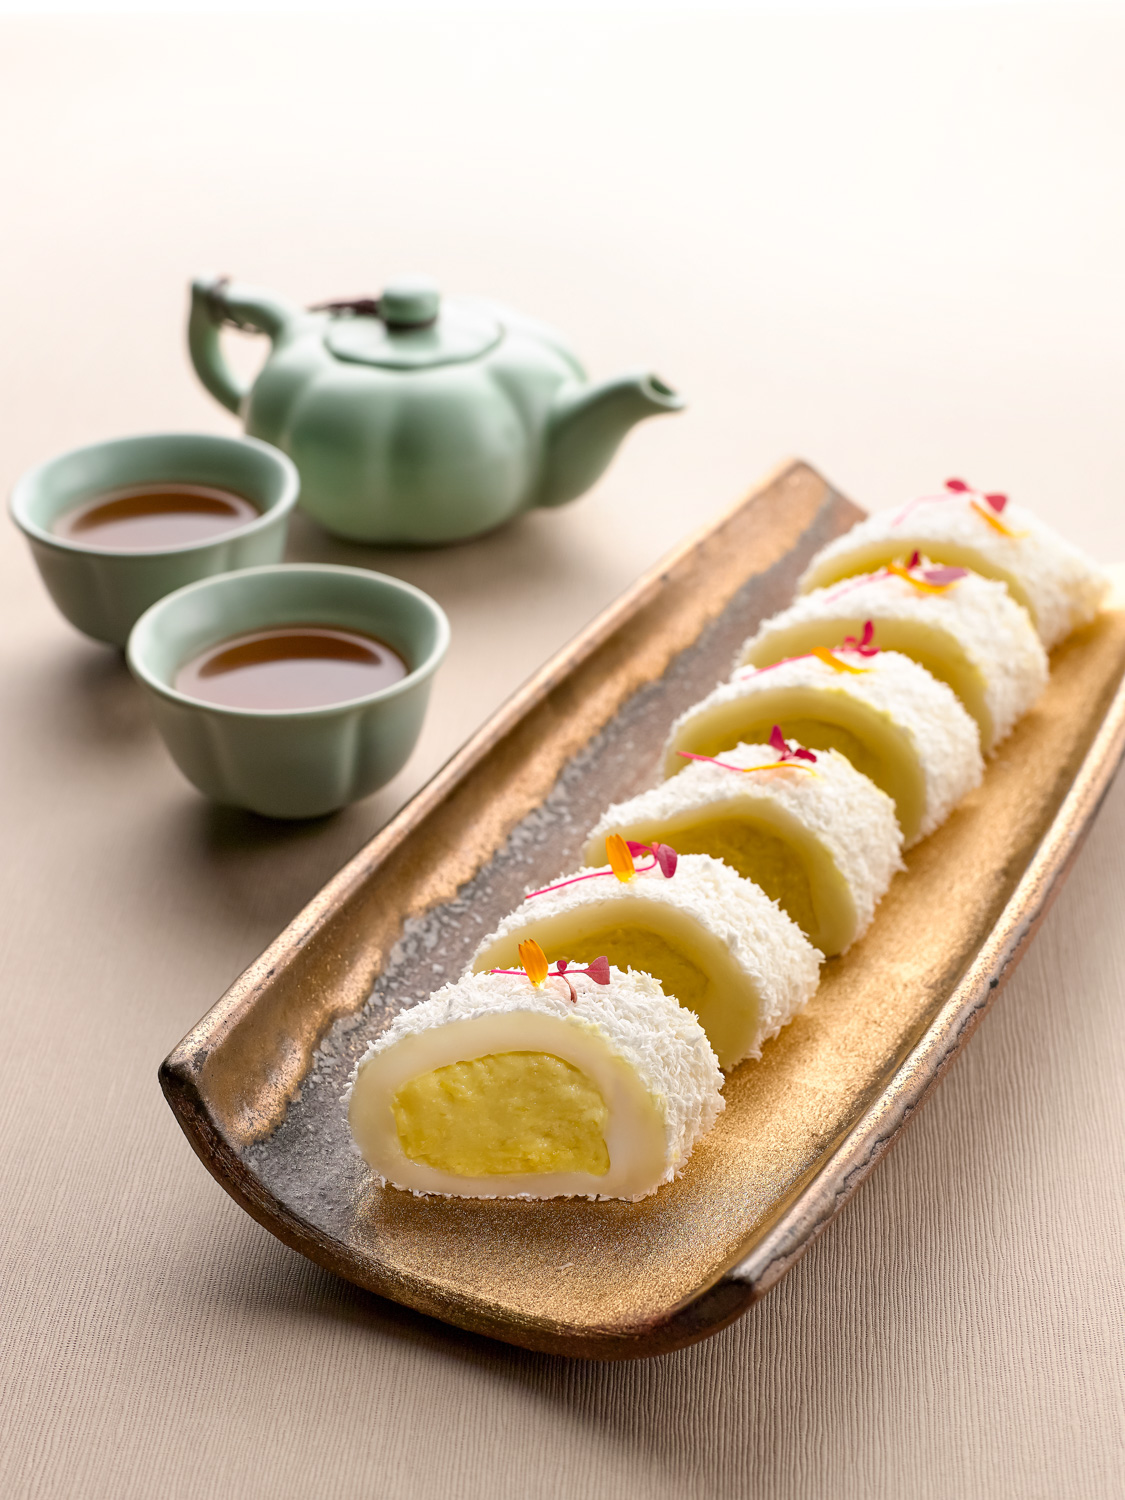 Chilled Glutinous Rice Rolls with Mao Shan Wang Durian Paste (猫山榴莲米滋卷)